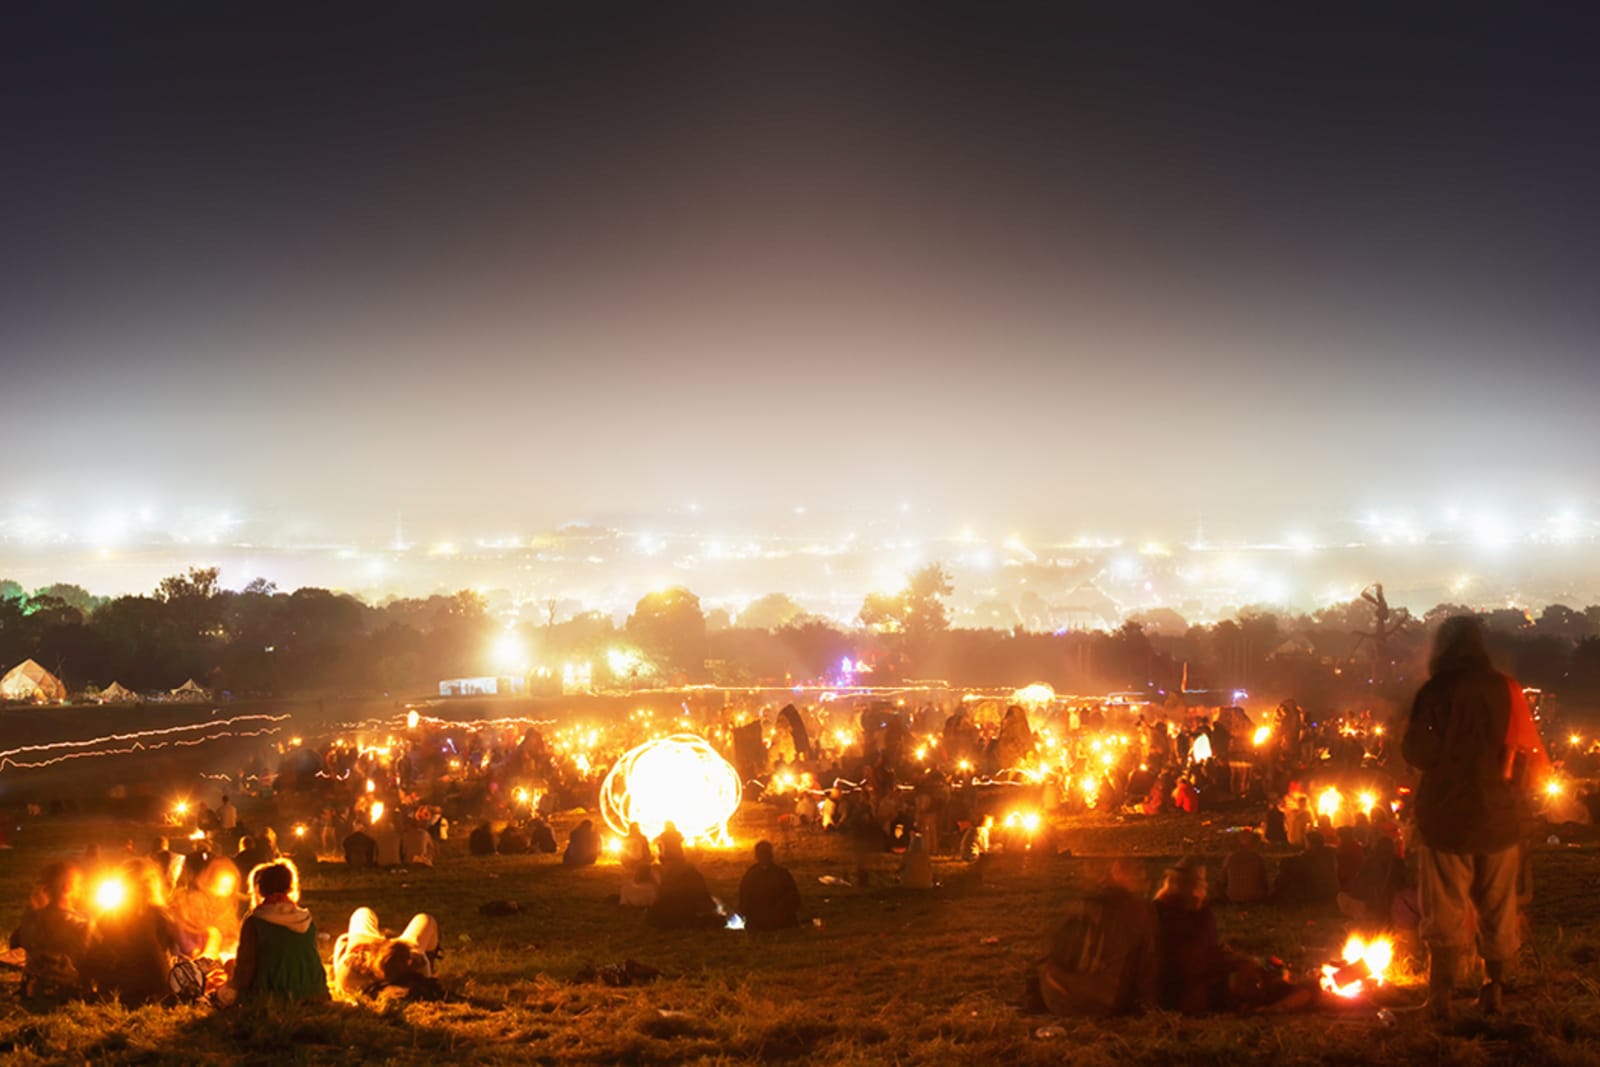 The Glastonbury Festival in England is one of the world's most distinct cultural festivals